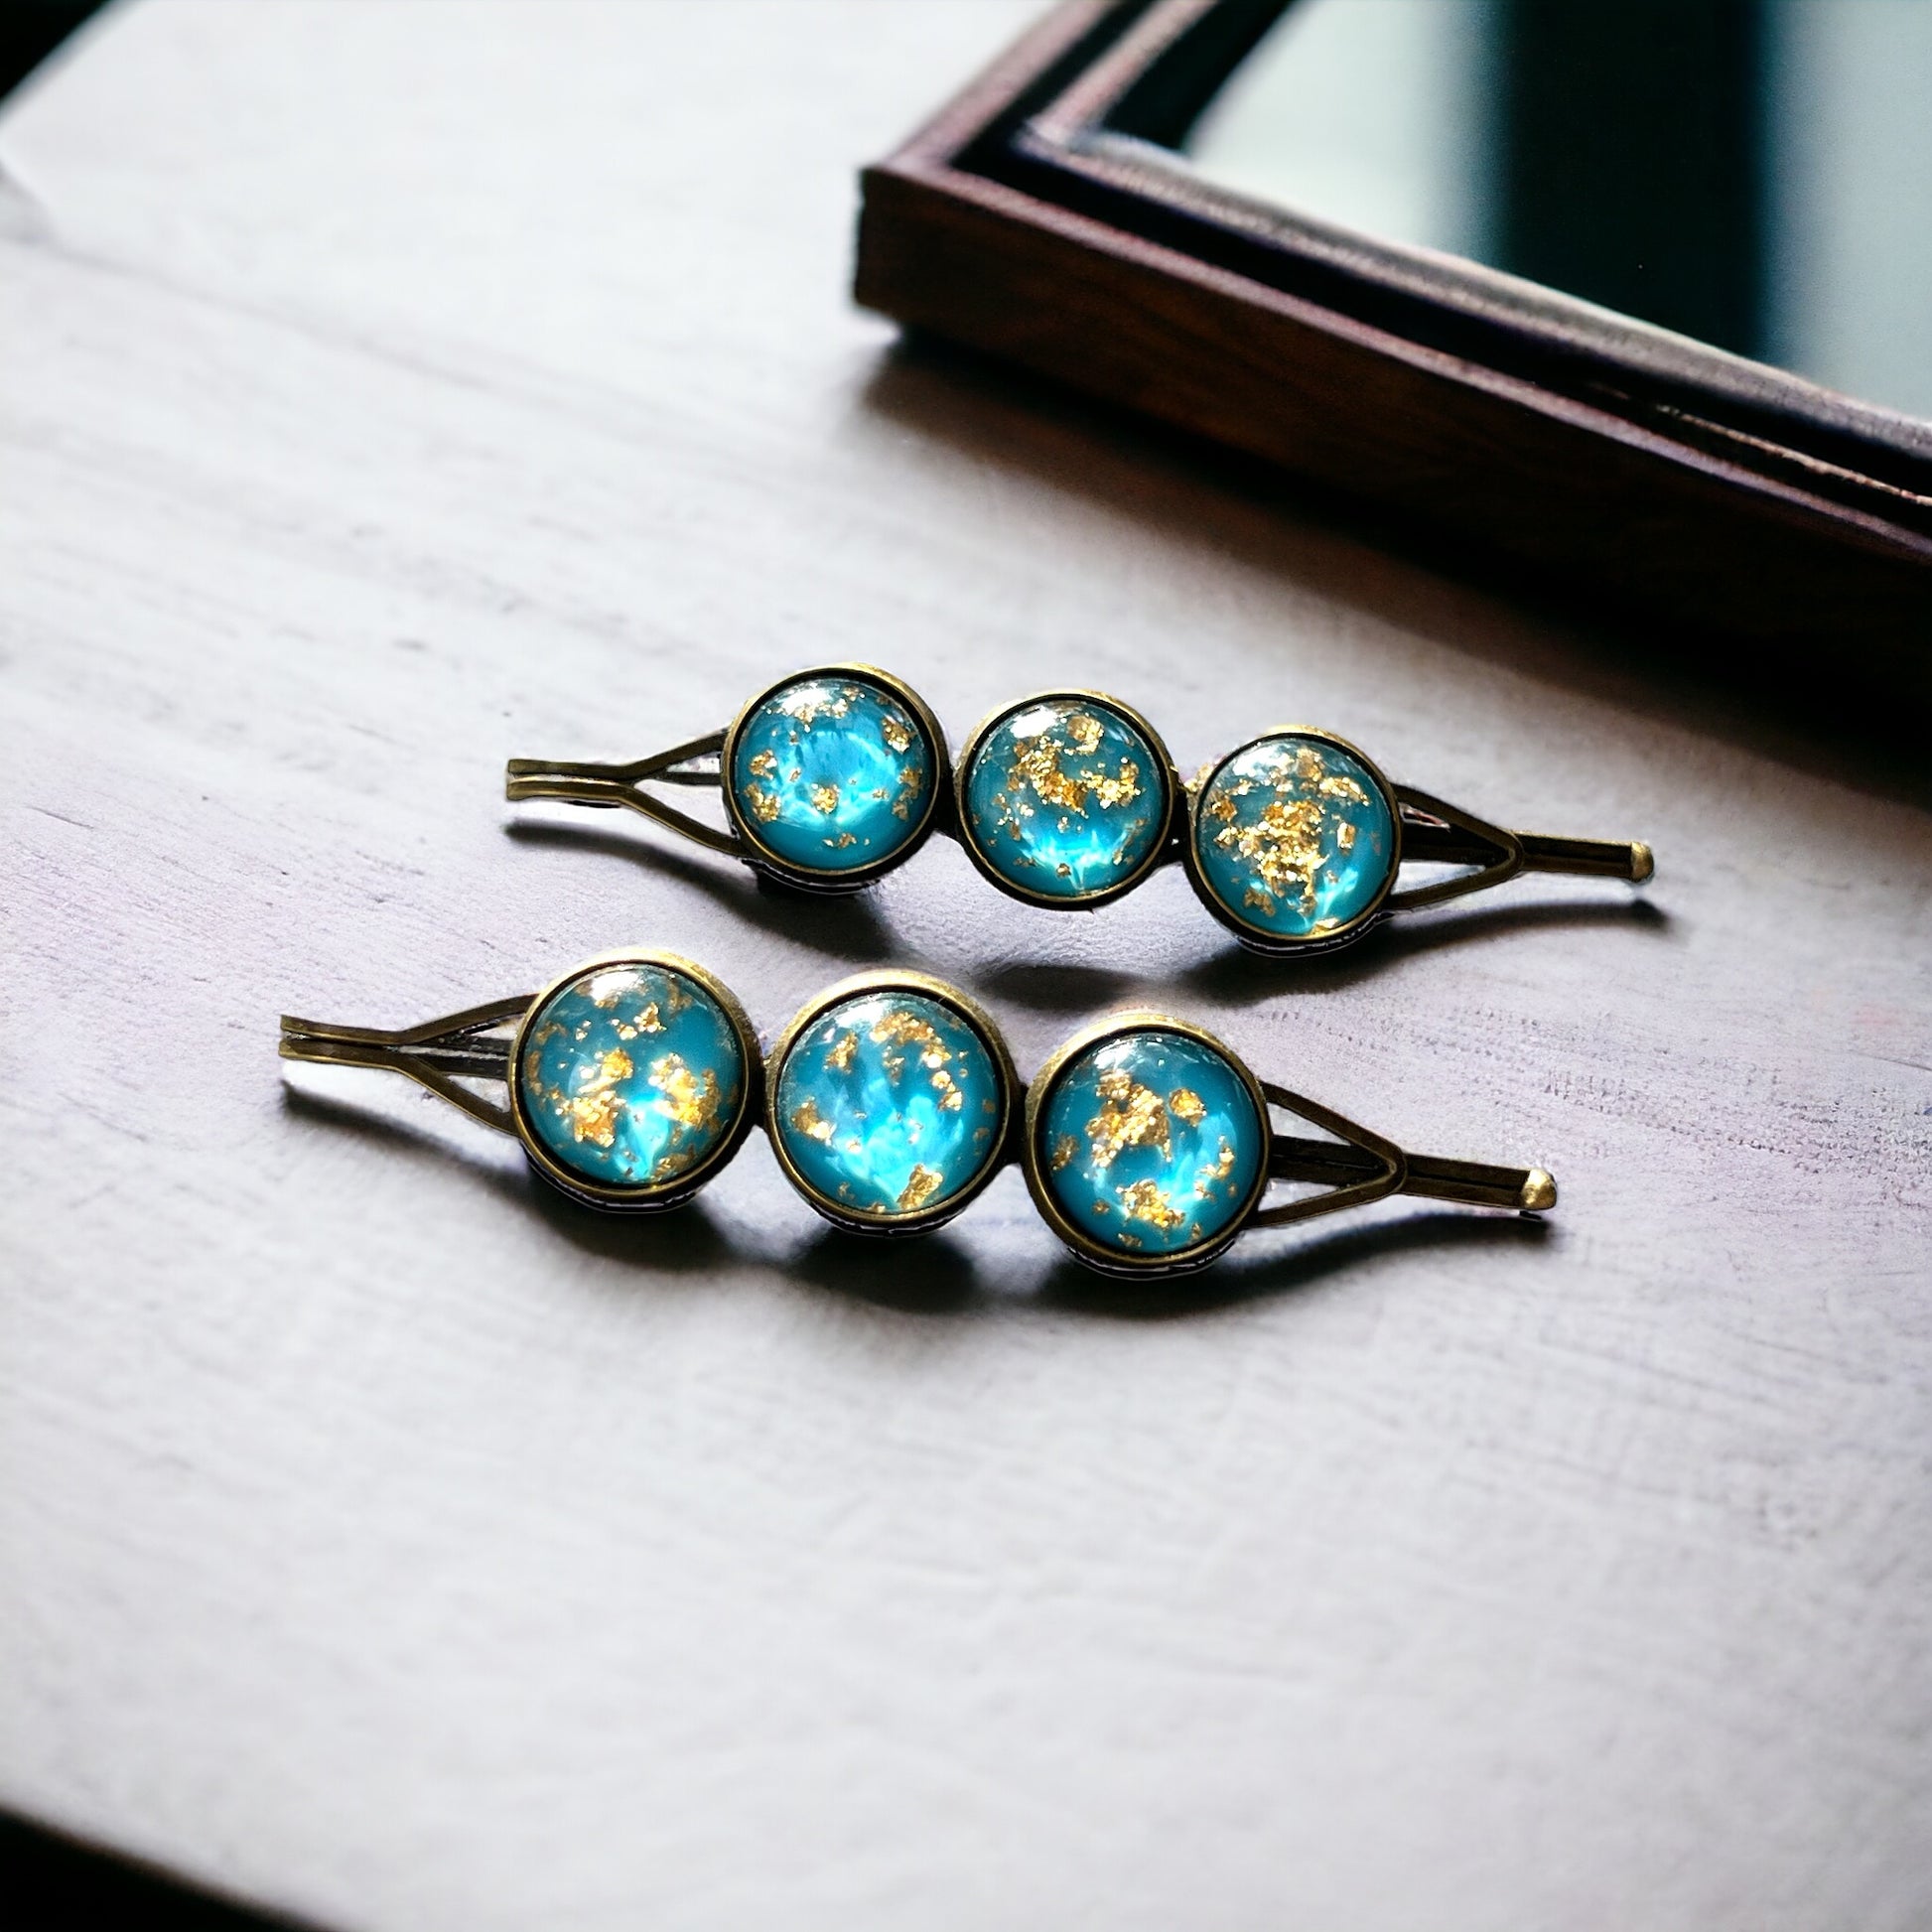 Turquoise Blue Gold Flake Glitter Hair Pins: Sparkling Accessories for Glamorous Styles